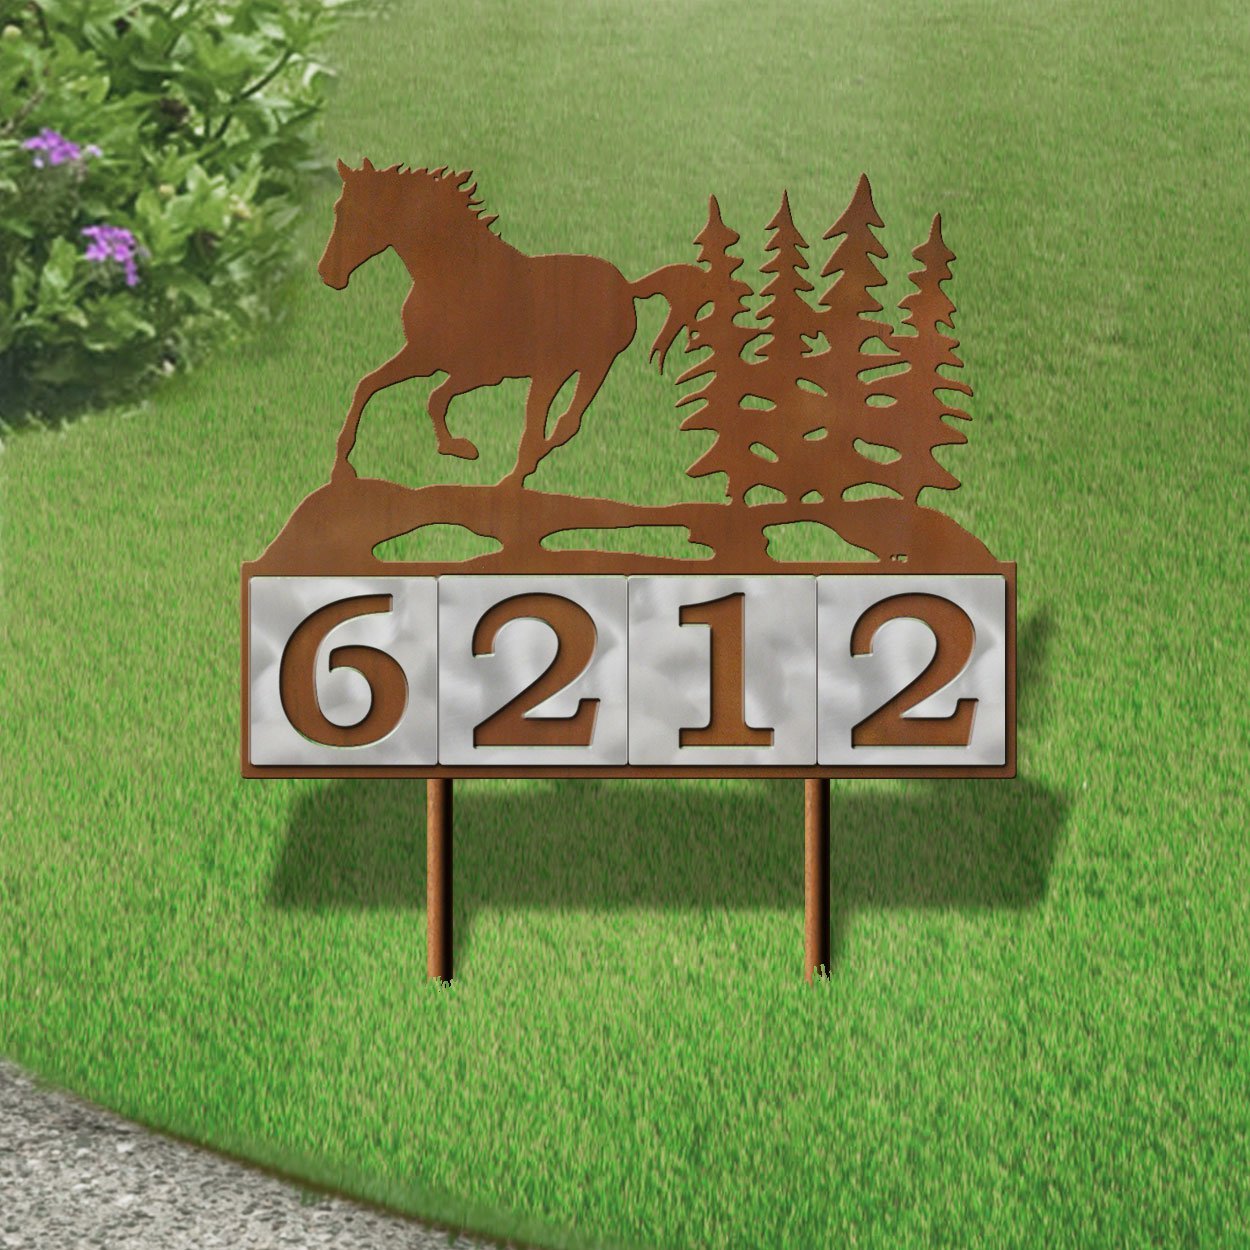 610104 - Running Horse Scene Design 4-Digit Horizontal 6-inch Tile Outdoor House Numbers Yard Sign